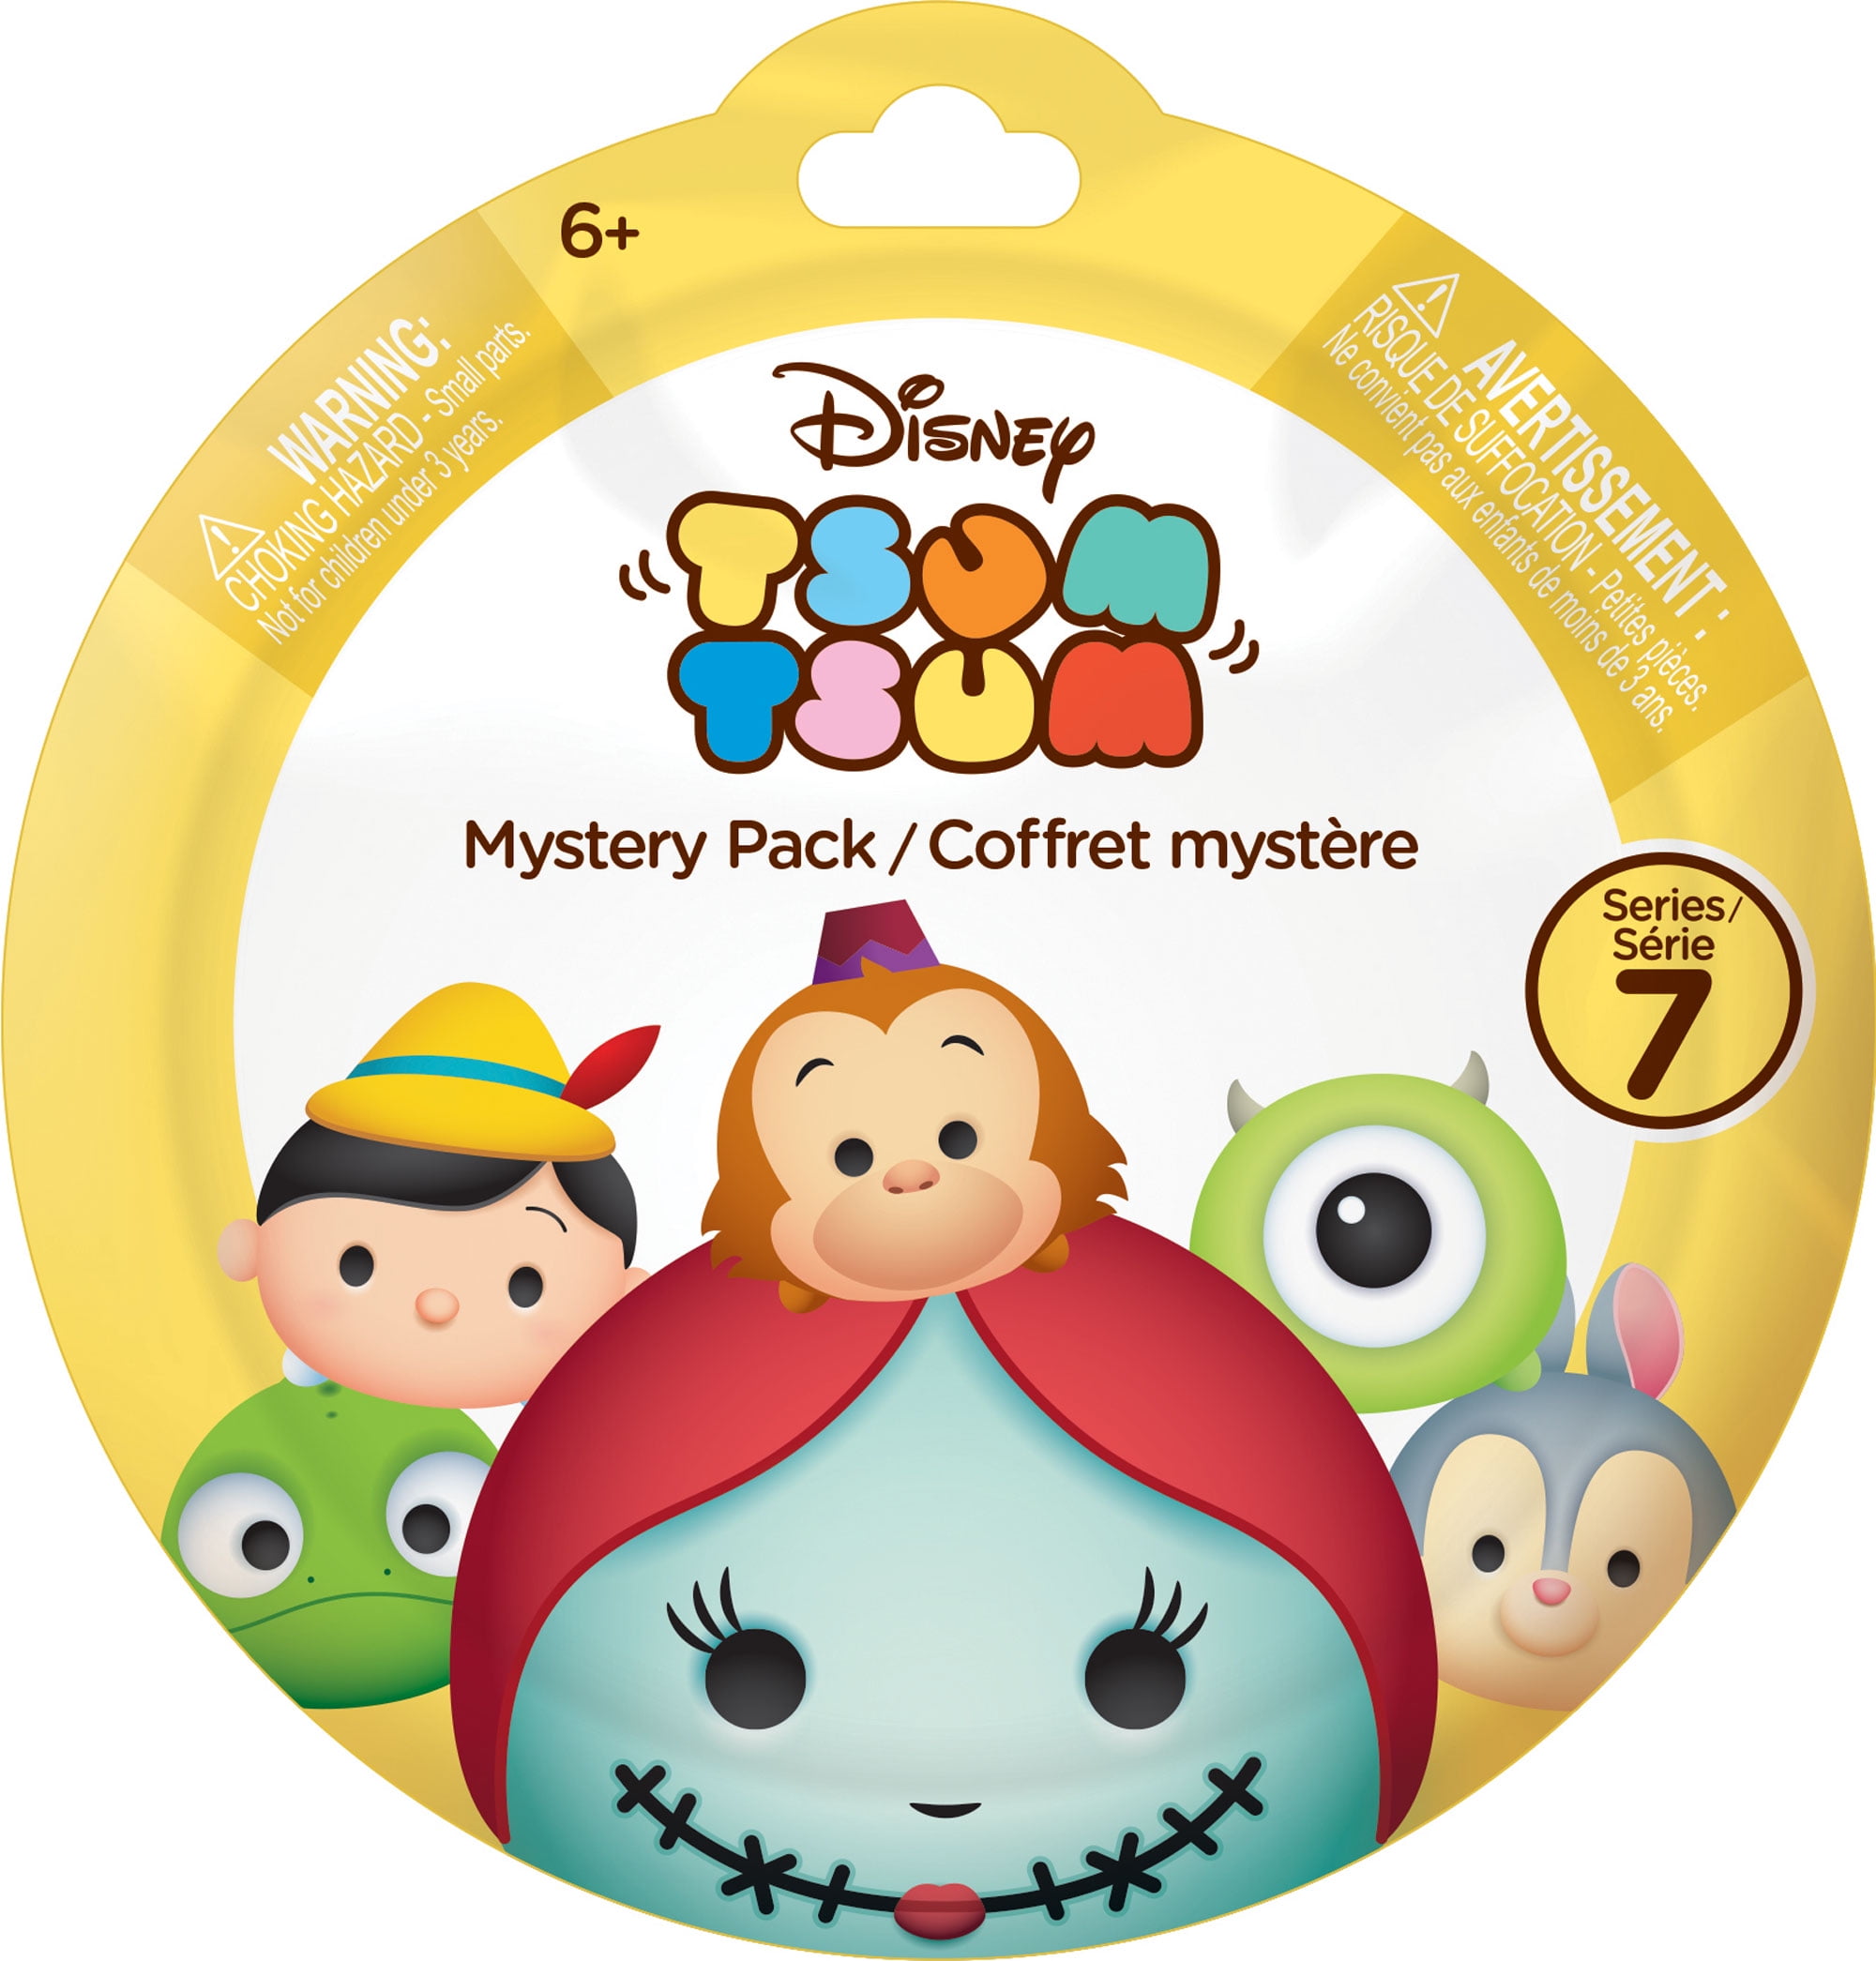 DISNEY Tsum Tsum MYSTERY PACK series 8 NEW in PACKAGE unopened 